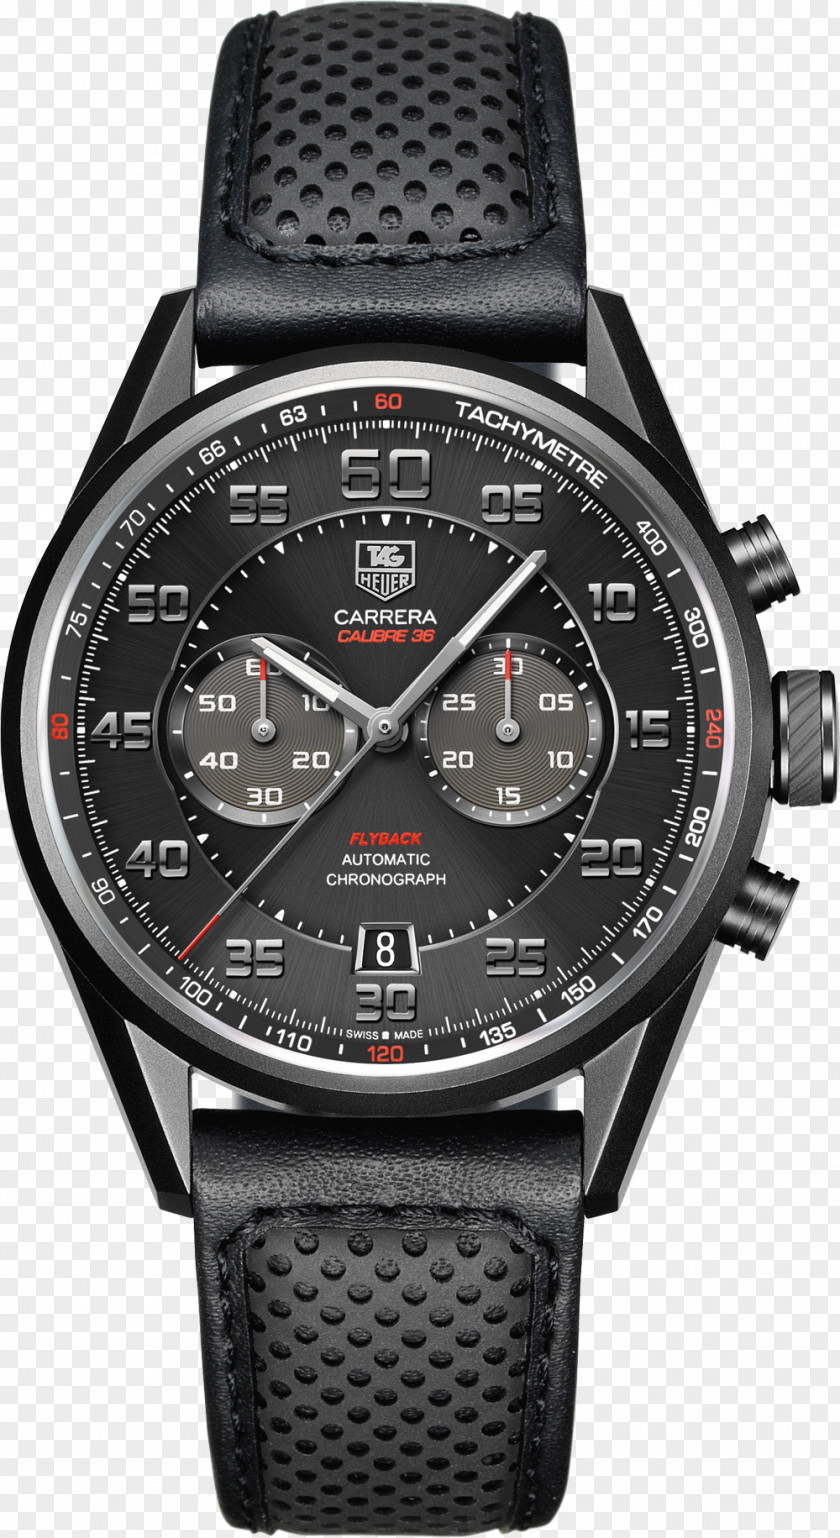 Watch TAG Heuer Carrera Calibre 5 16 Day-Date Chronograph PNG